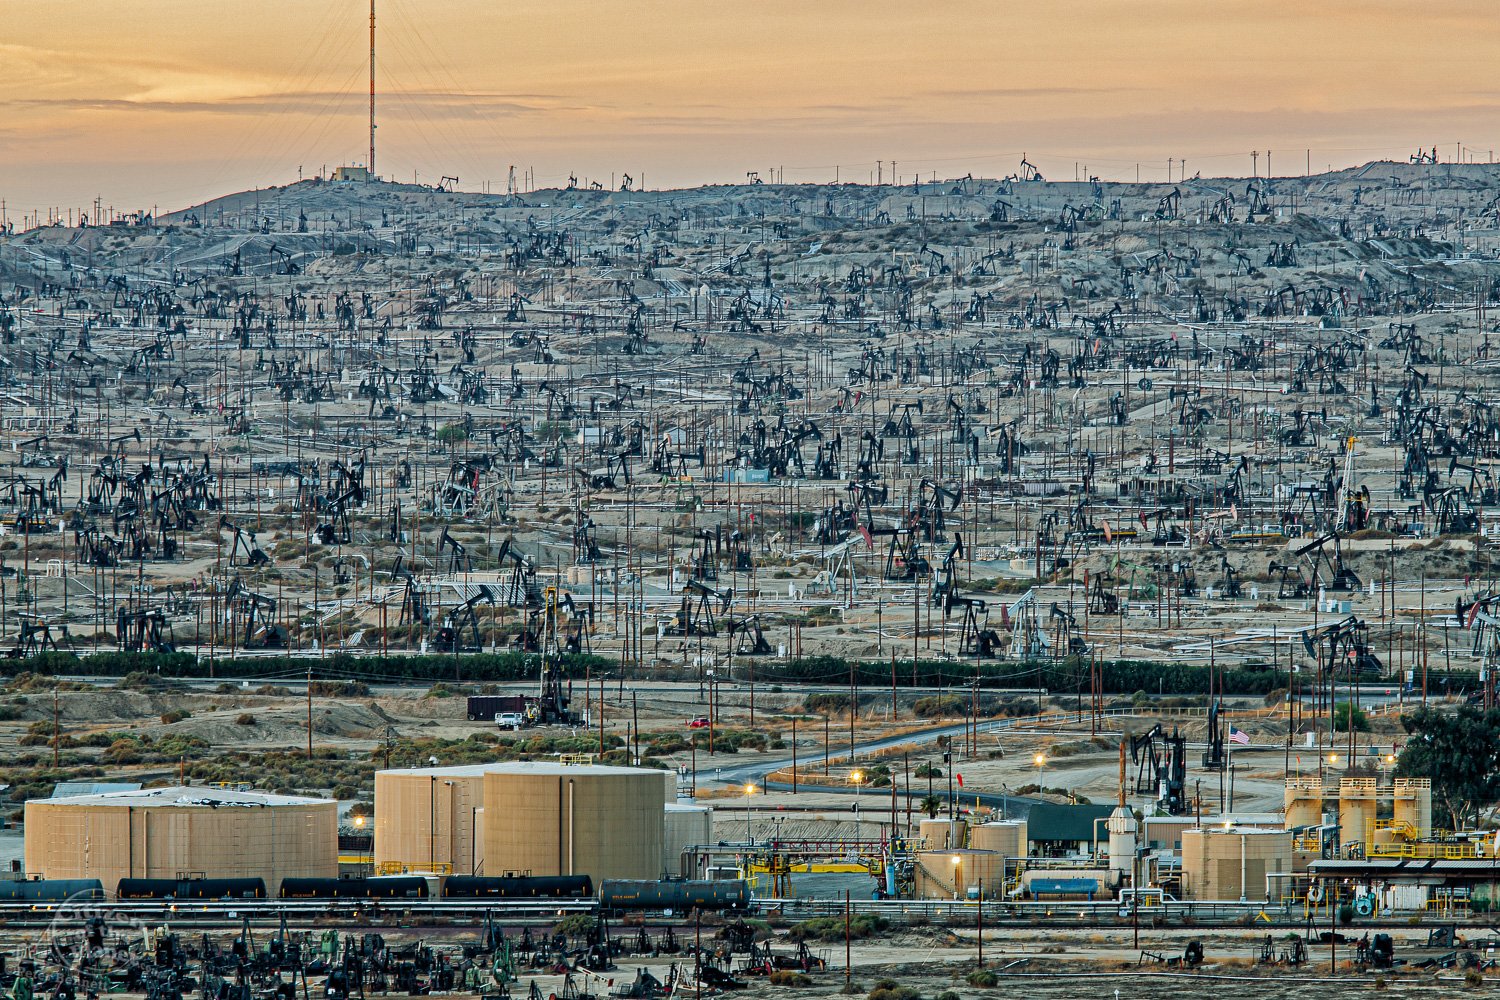  Kern River Oil Field in Bakersfield, is the third largest oil field in California and is the  densest operational oil development in the state, with over 9,000 oil wells in an area just under 11 acres, Bakersfield, Kern County 